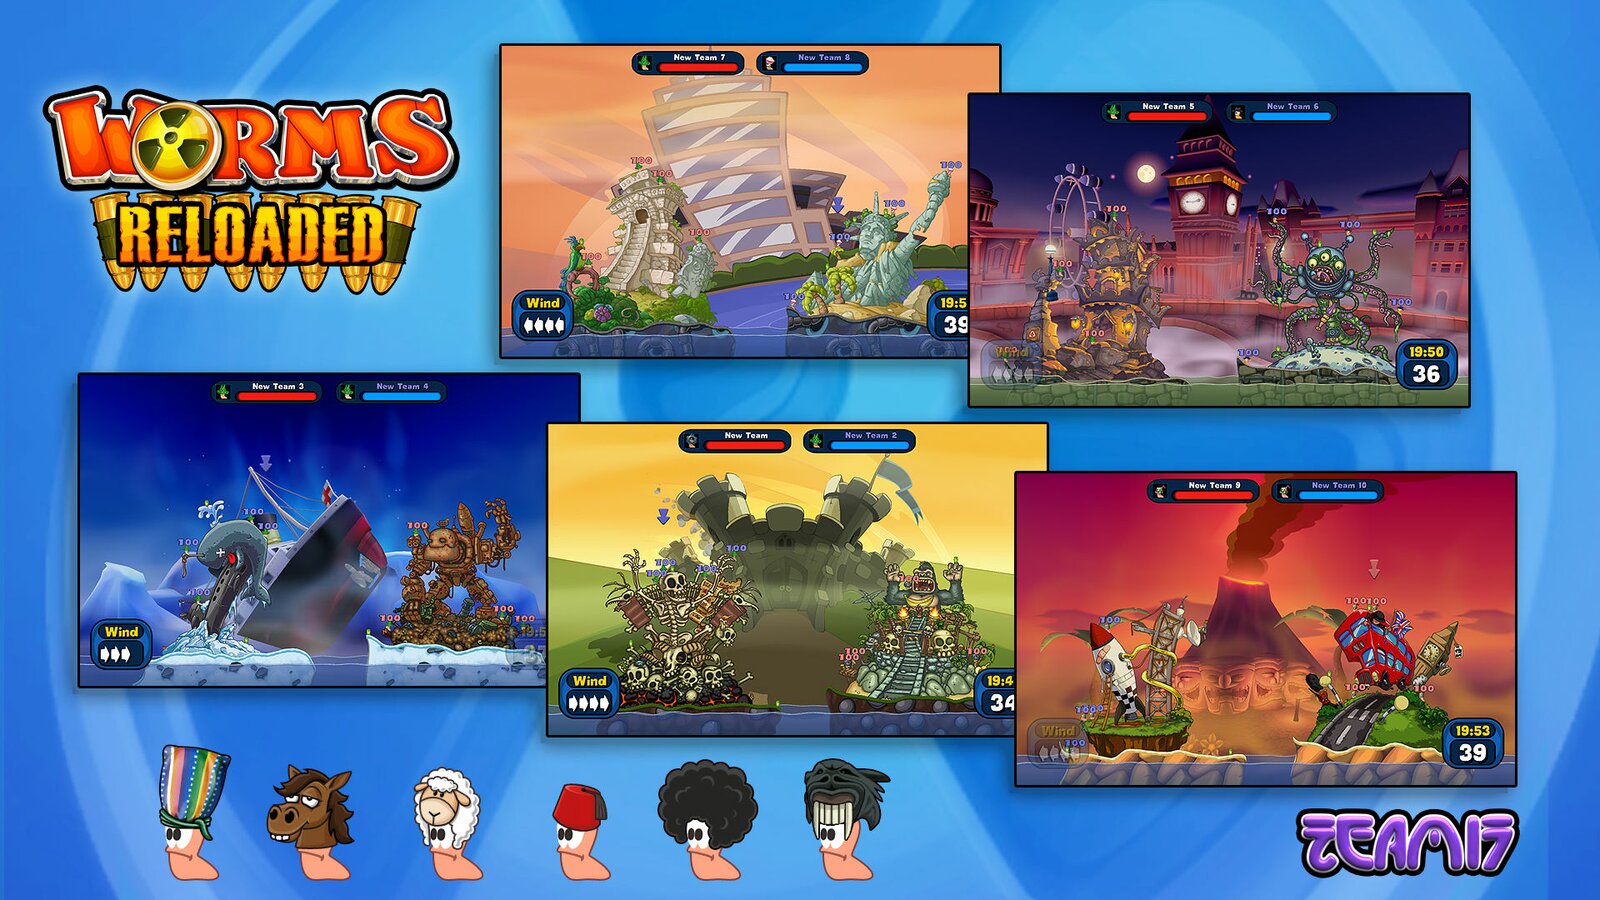 Worms Reloaded - The "Pre-order Forts and Hats" DLC Pack